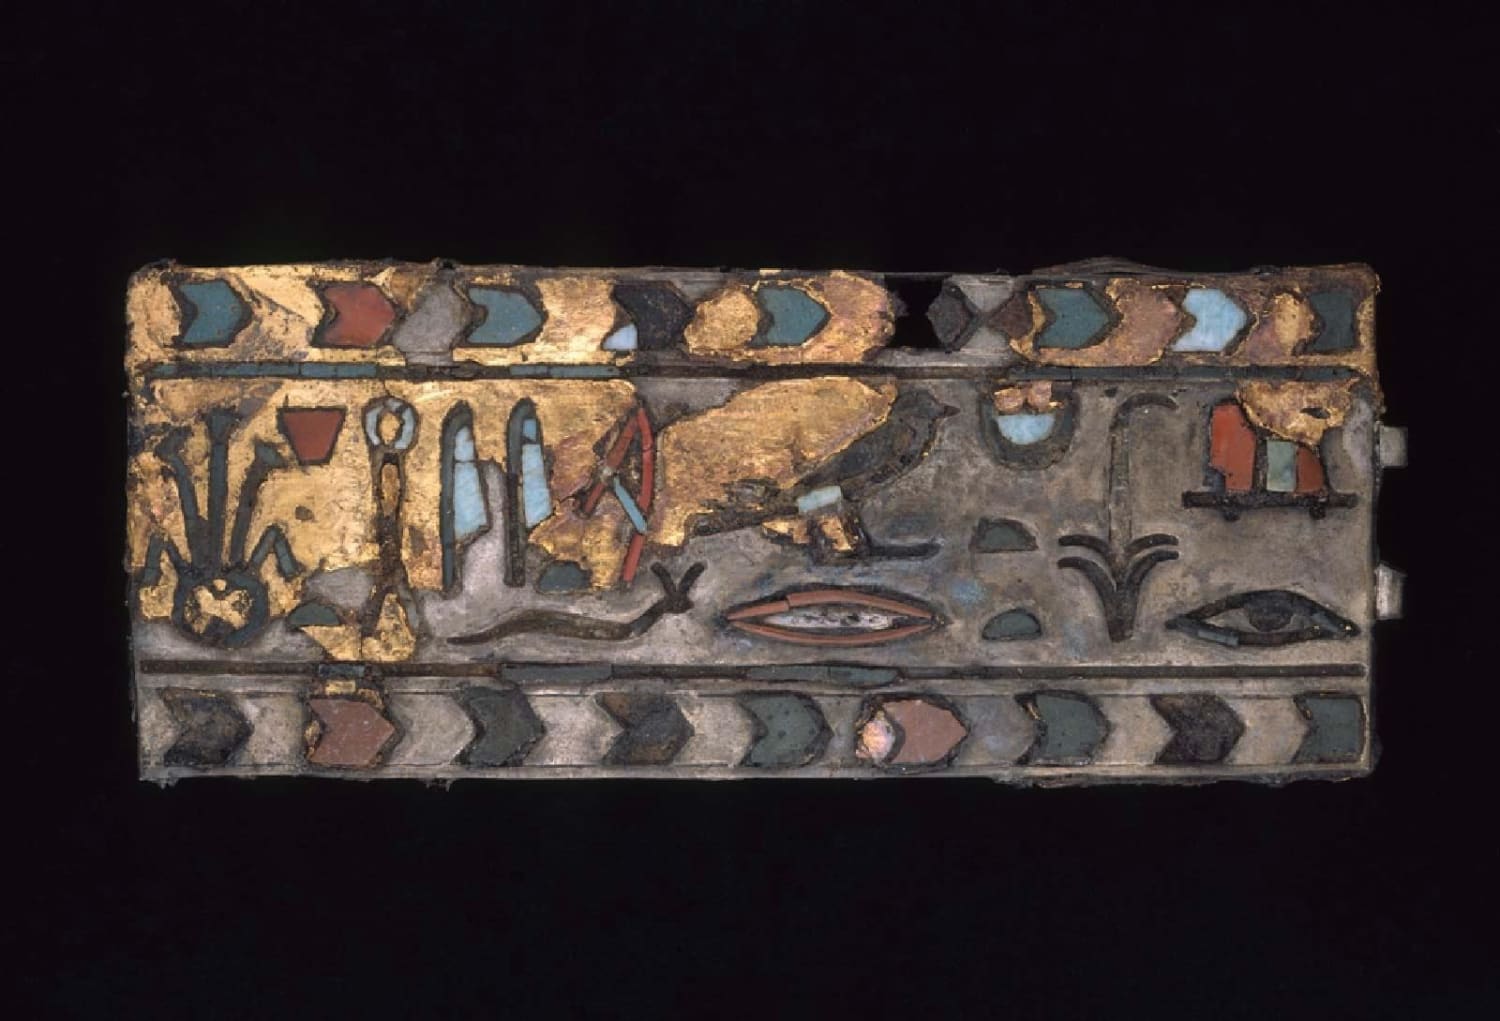 Belt buckle inscribed for Nefertari, Great Royal Wife of Rameses the Great. His reign: 1279–1213 B.C., Pharaonic Egypt. Museum of Fine Arts, Boston.